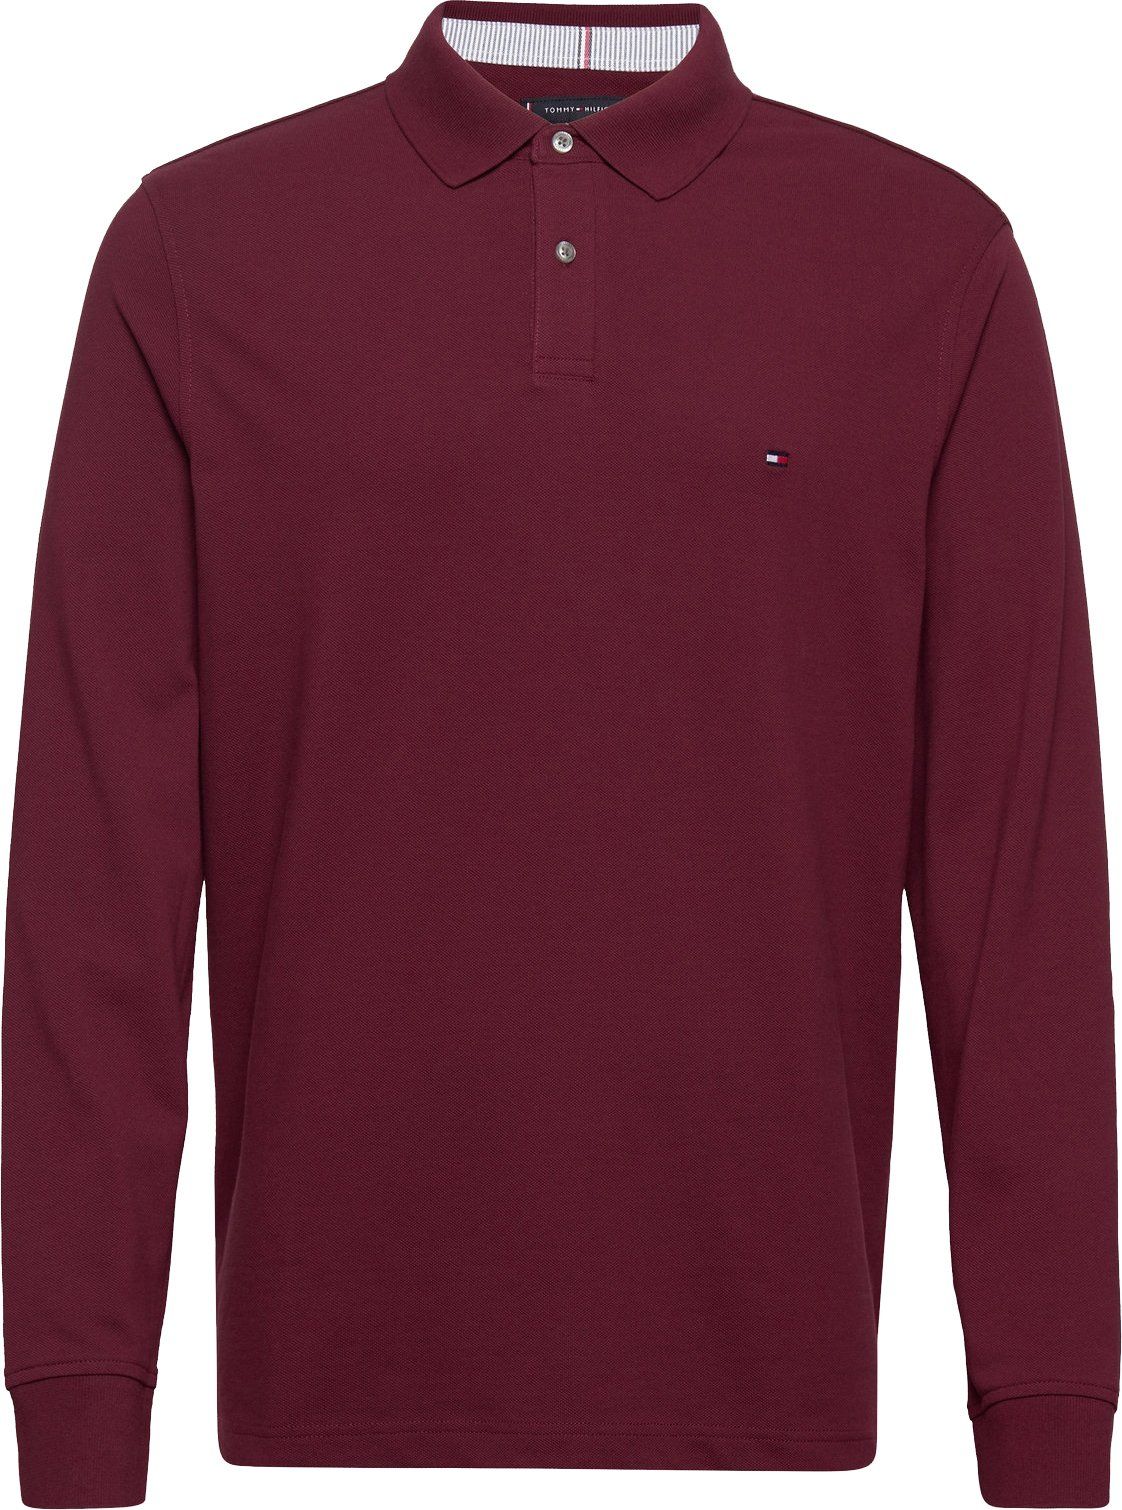 Tommy Hilfiger Big And Tall Polo Shirt Long Sleeve Bordeaux Burgundy size 3XL